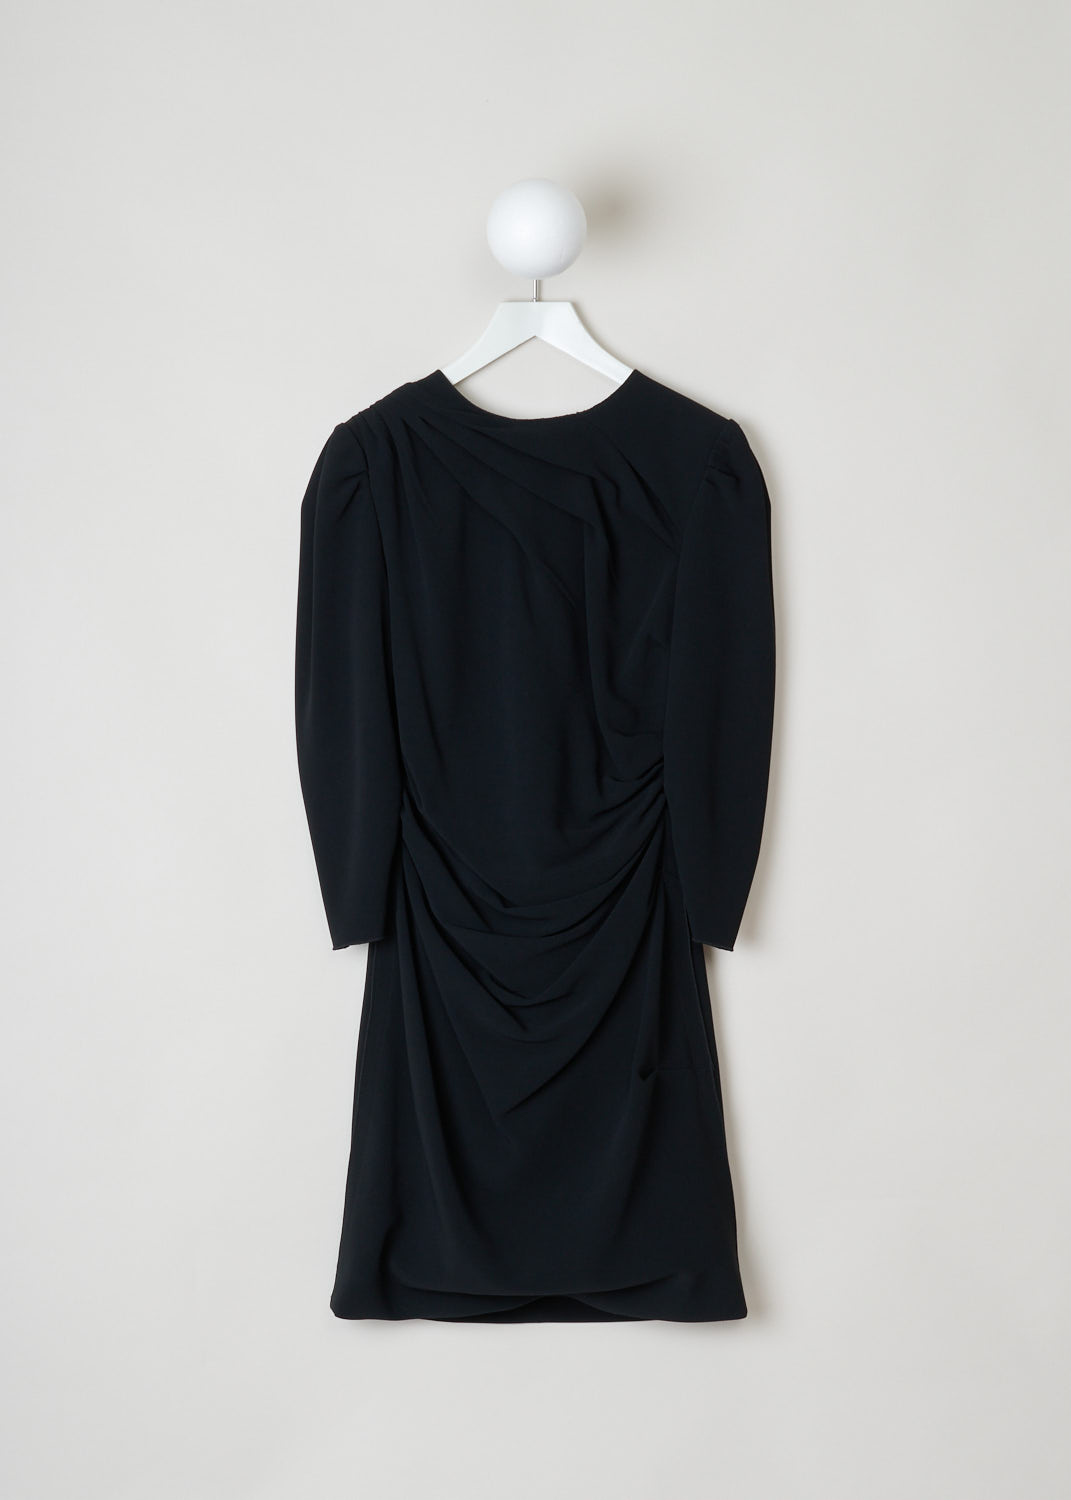 Dolce & Gabbana, Black mid-length dress with draped features, F6BQ0T_FSADD_X0873, black, front, Black draped dress featuring a round neckline, 3/4 sleeve length with a midi dress length. Pleats staring on the shoulder flow down the dress, with similar pleats starting on waist height.  